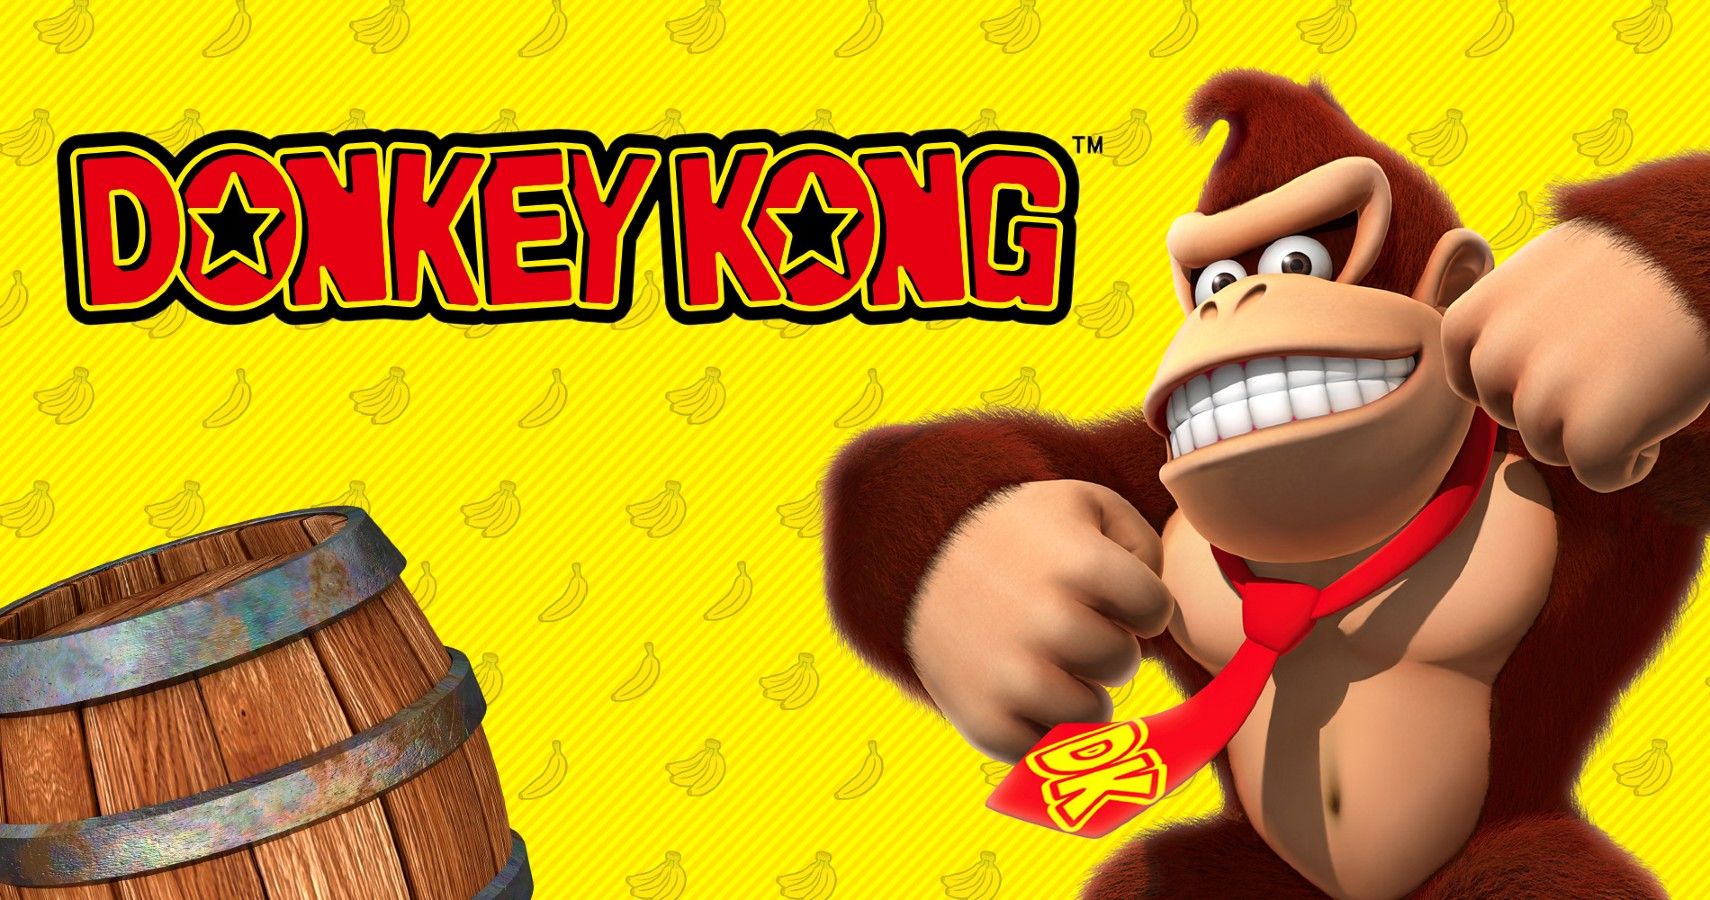 Nintendo Character Donkey Kong in Official Art